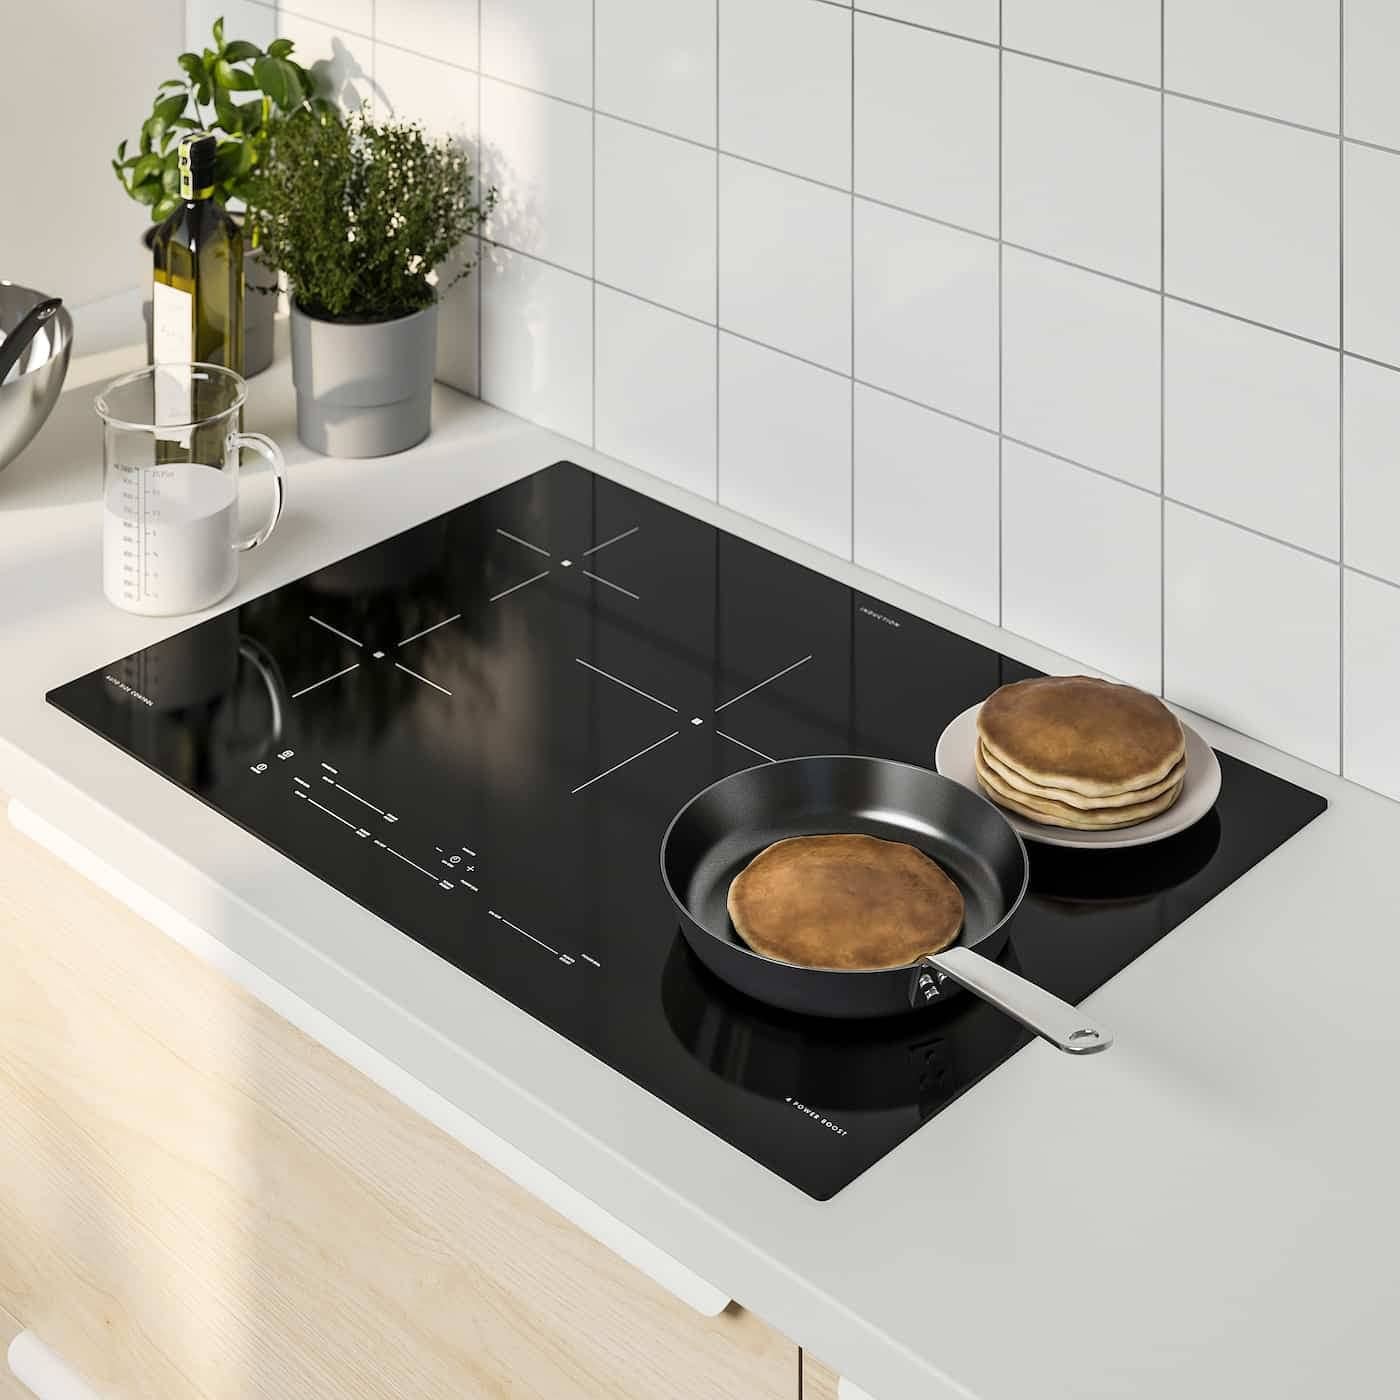 15 Most Common Induction Cooktop Problems & Troubleshooting